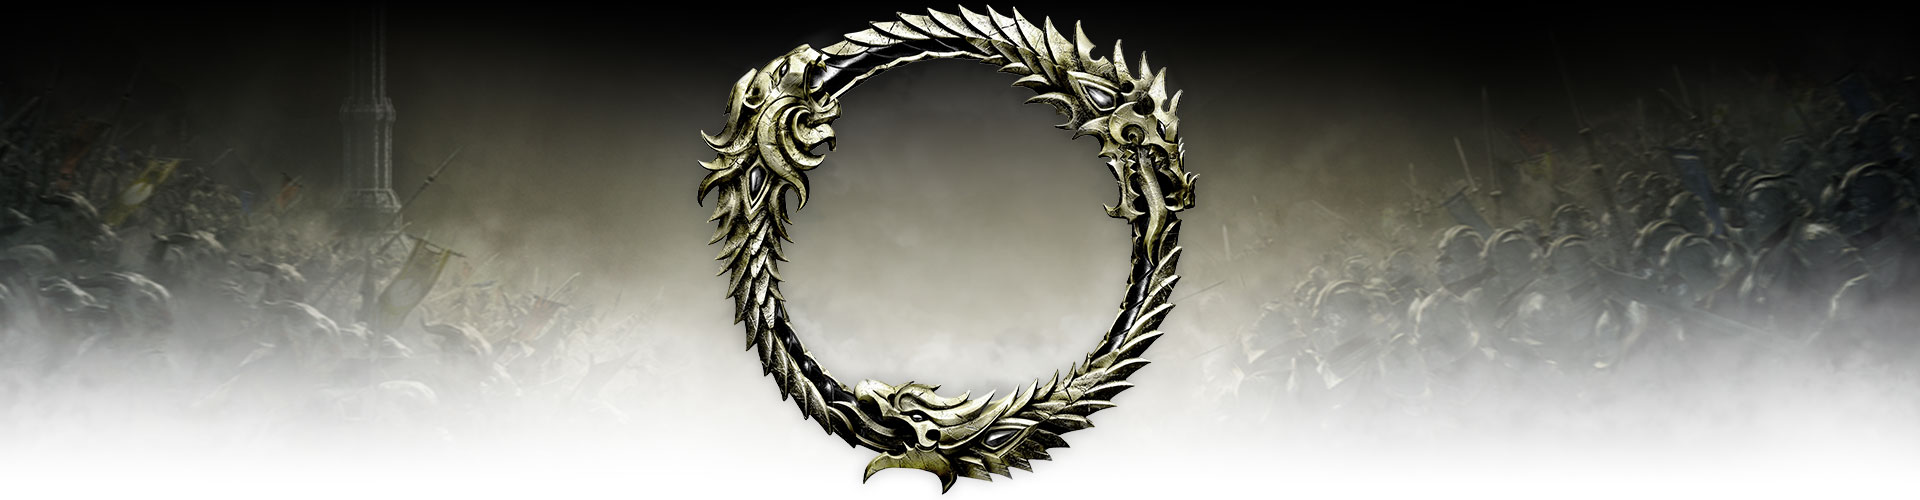 A metal ouroboros symbol displayed superimposed on the top of a fierce battlefield.